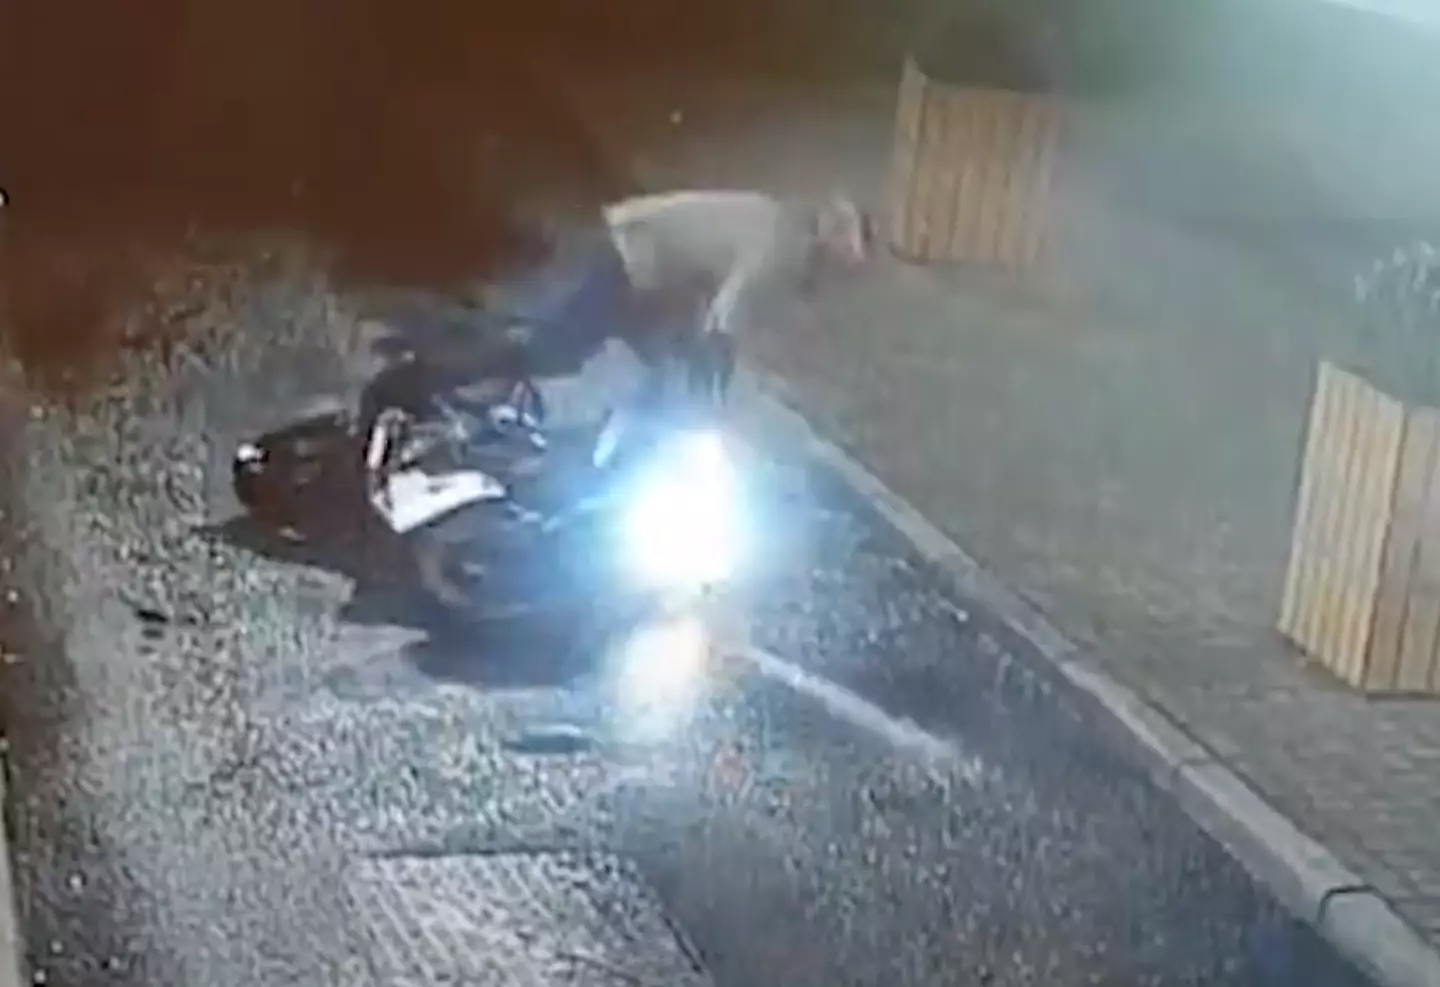 Cameron Dixon was caught on CCTV falling off his bike while drunk.